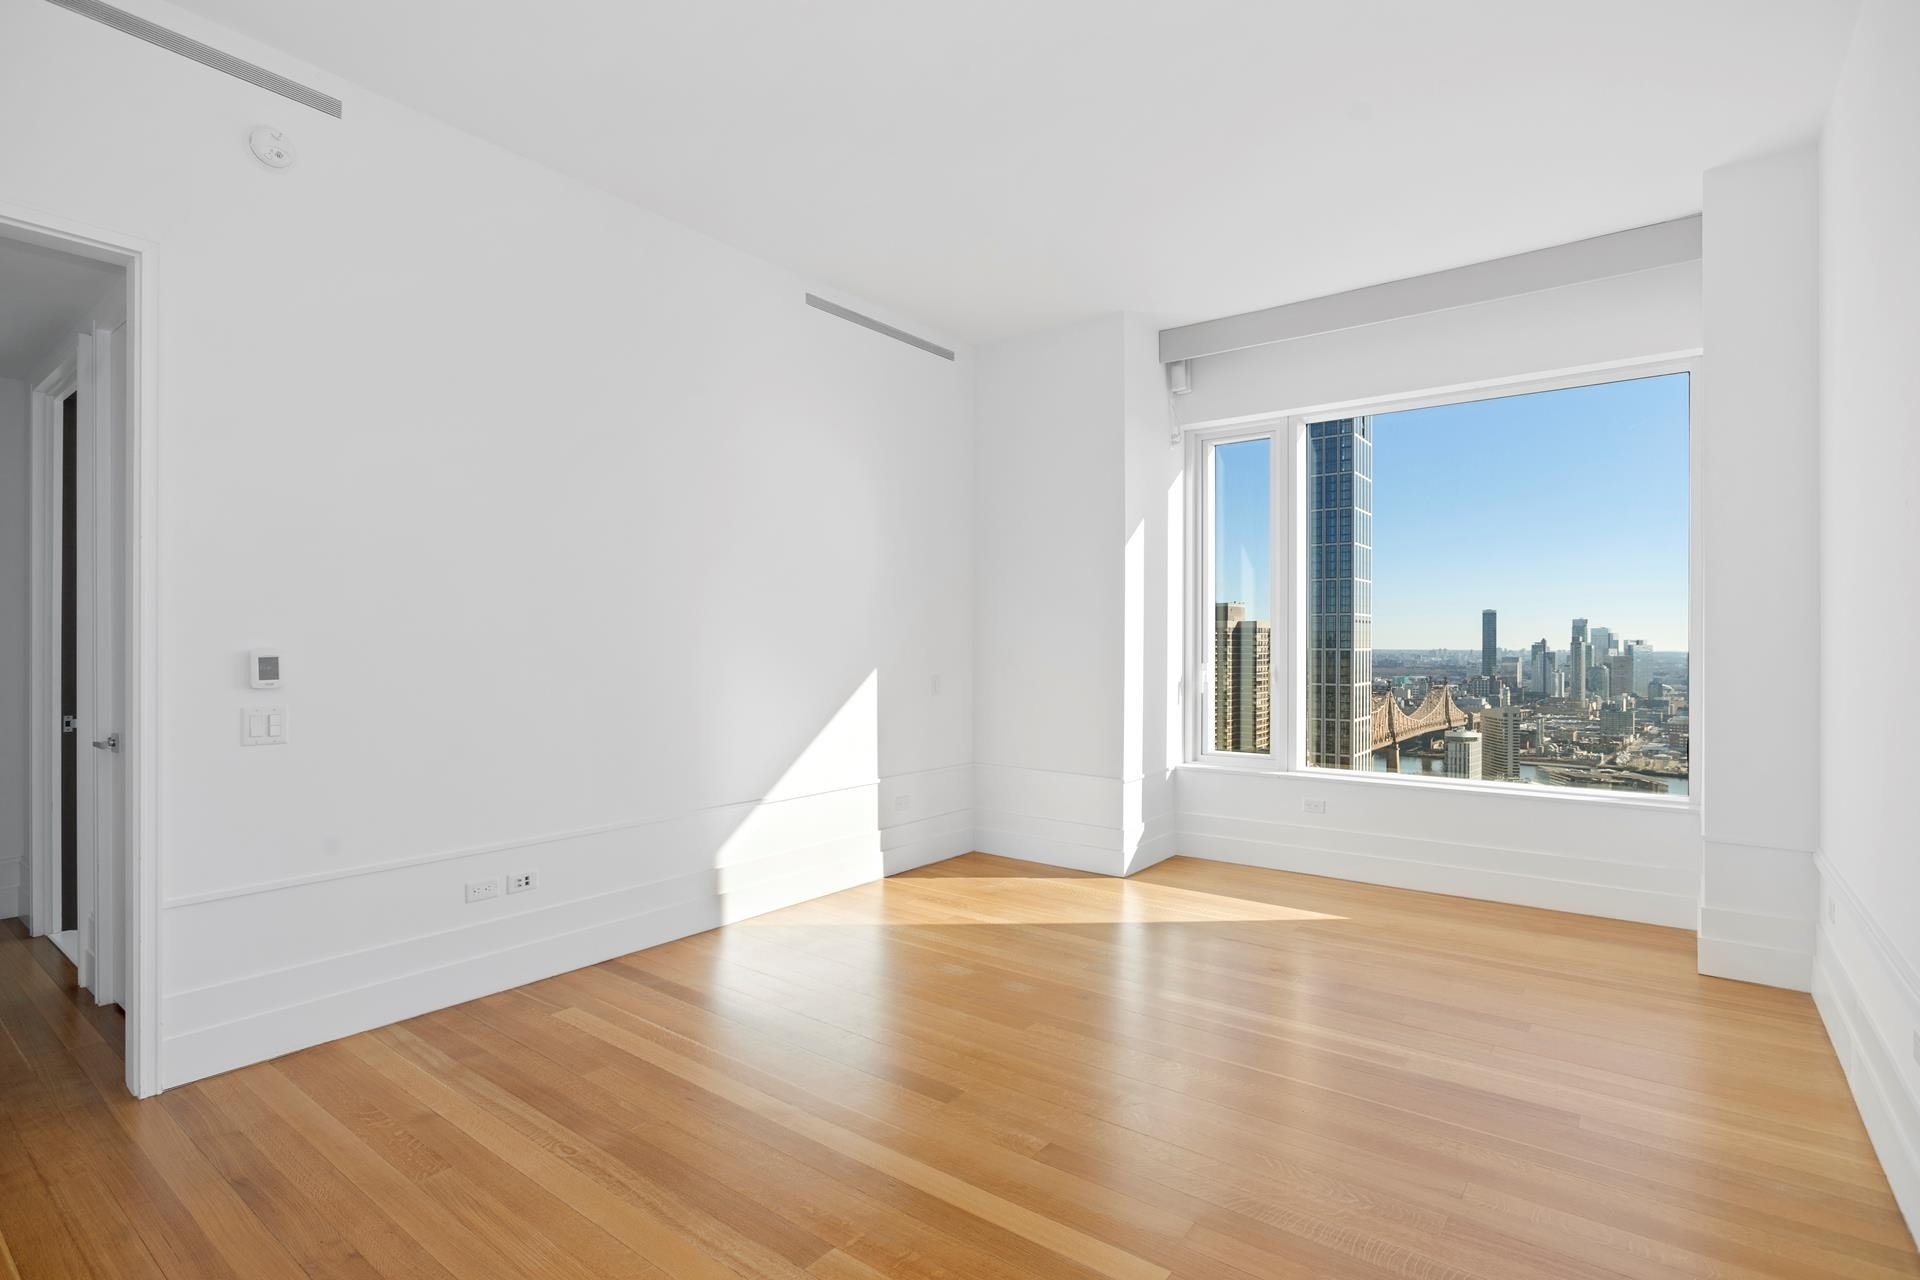 12. Condominiums for Sale at 252 E 57TH ST, 49B Midtown East, New York, NY 10022